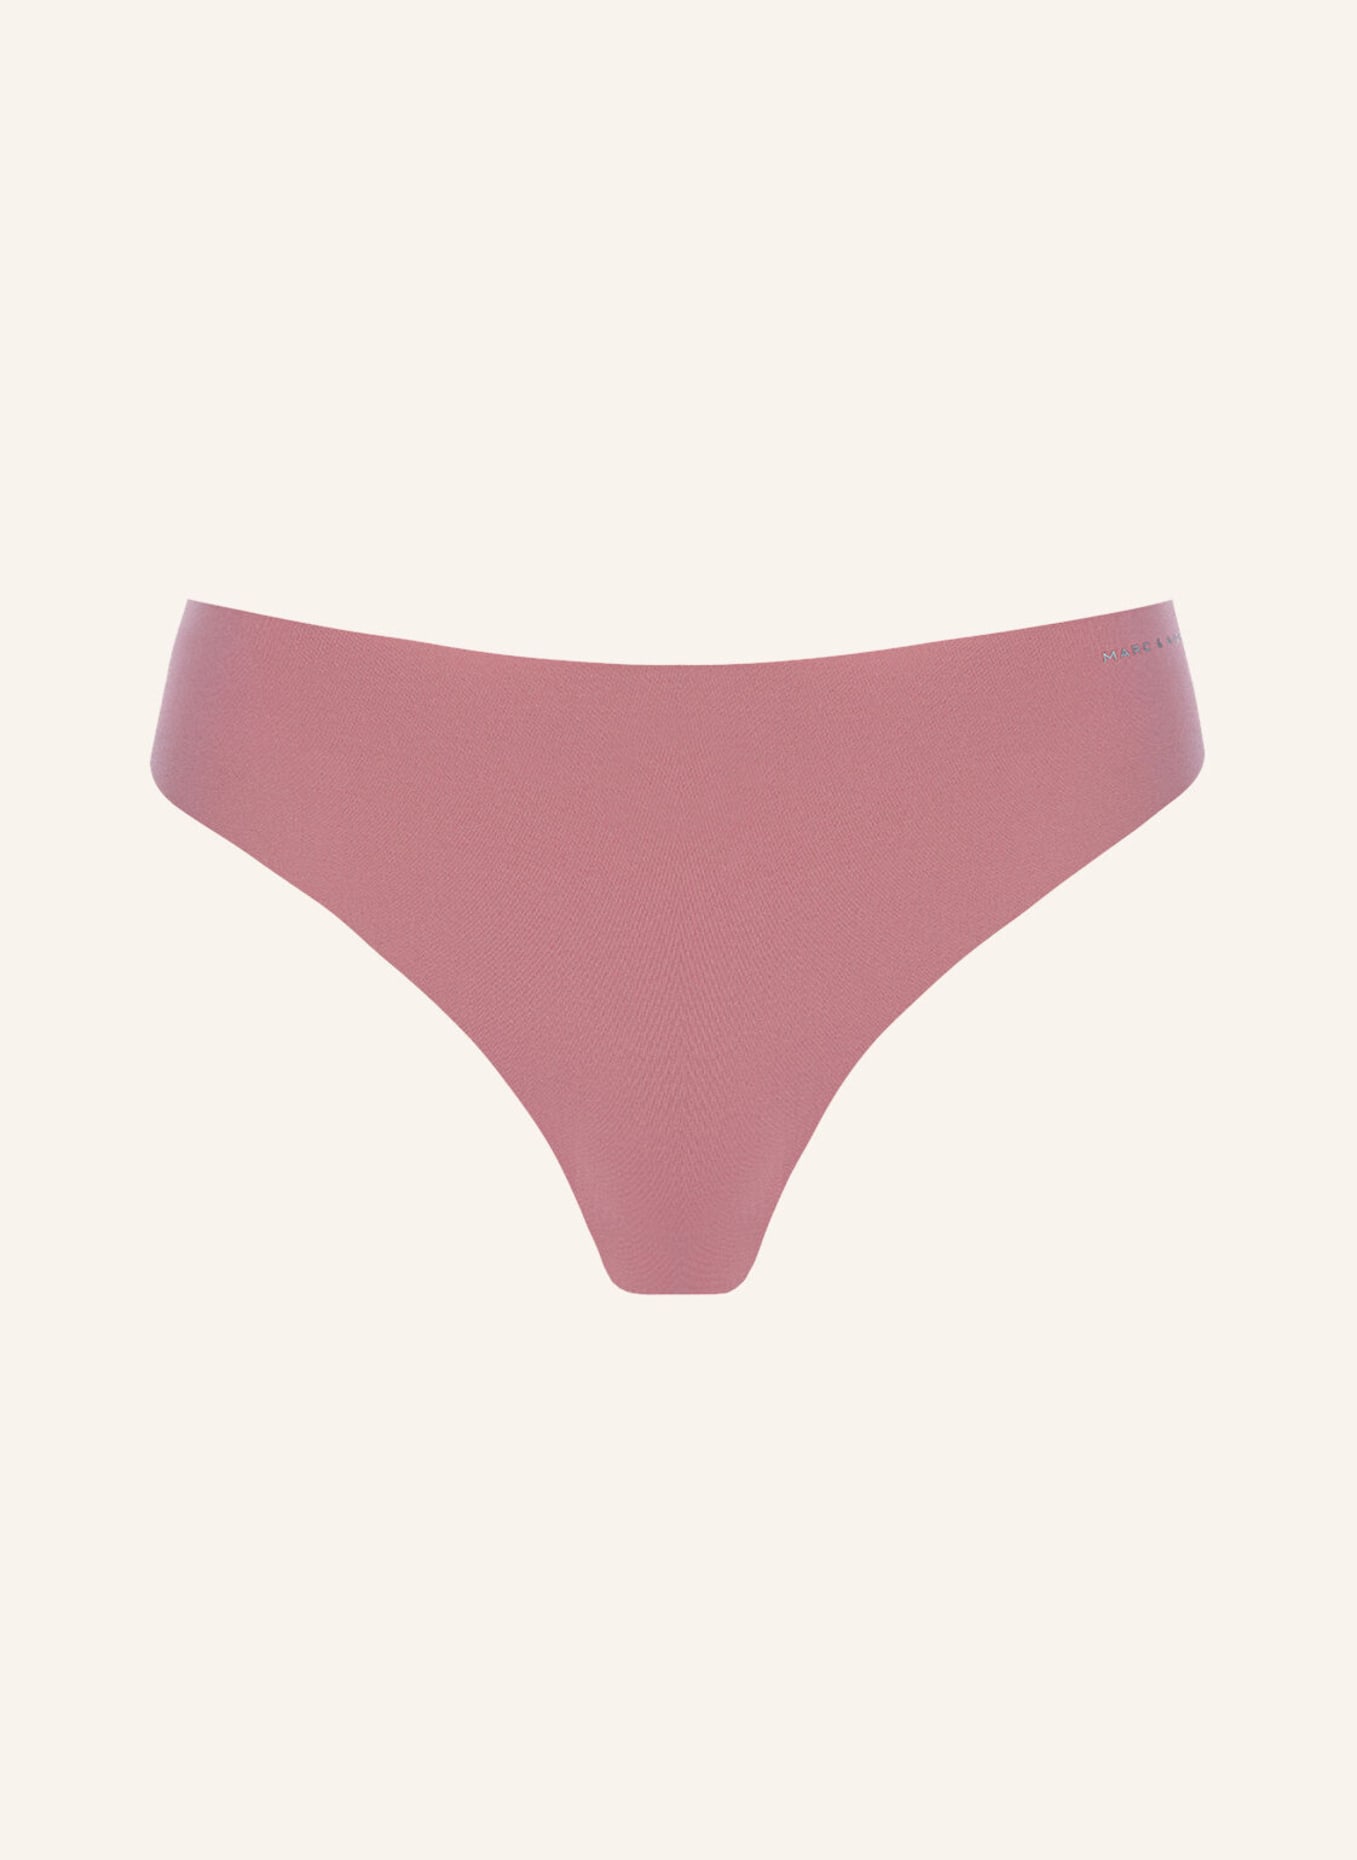 Marc & André String SECOND SKIN, Farbe: PINK (Bild 1)